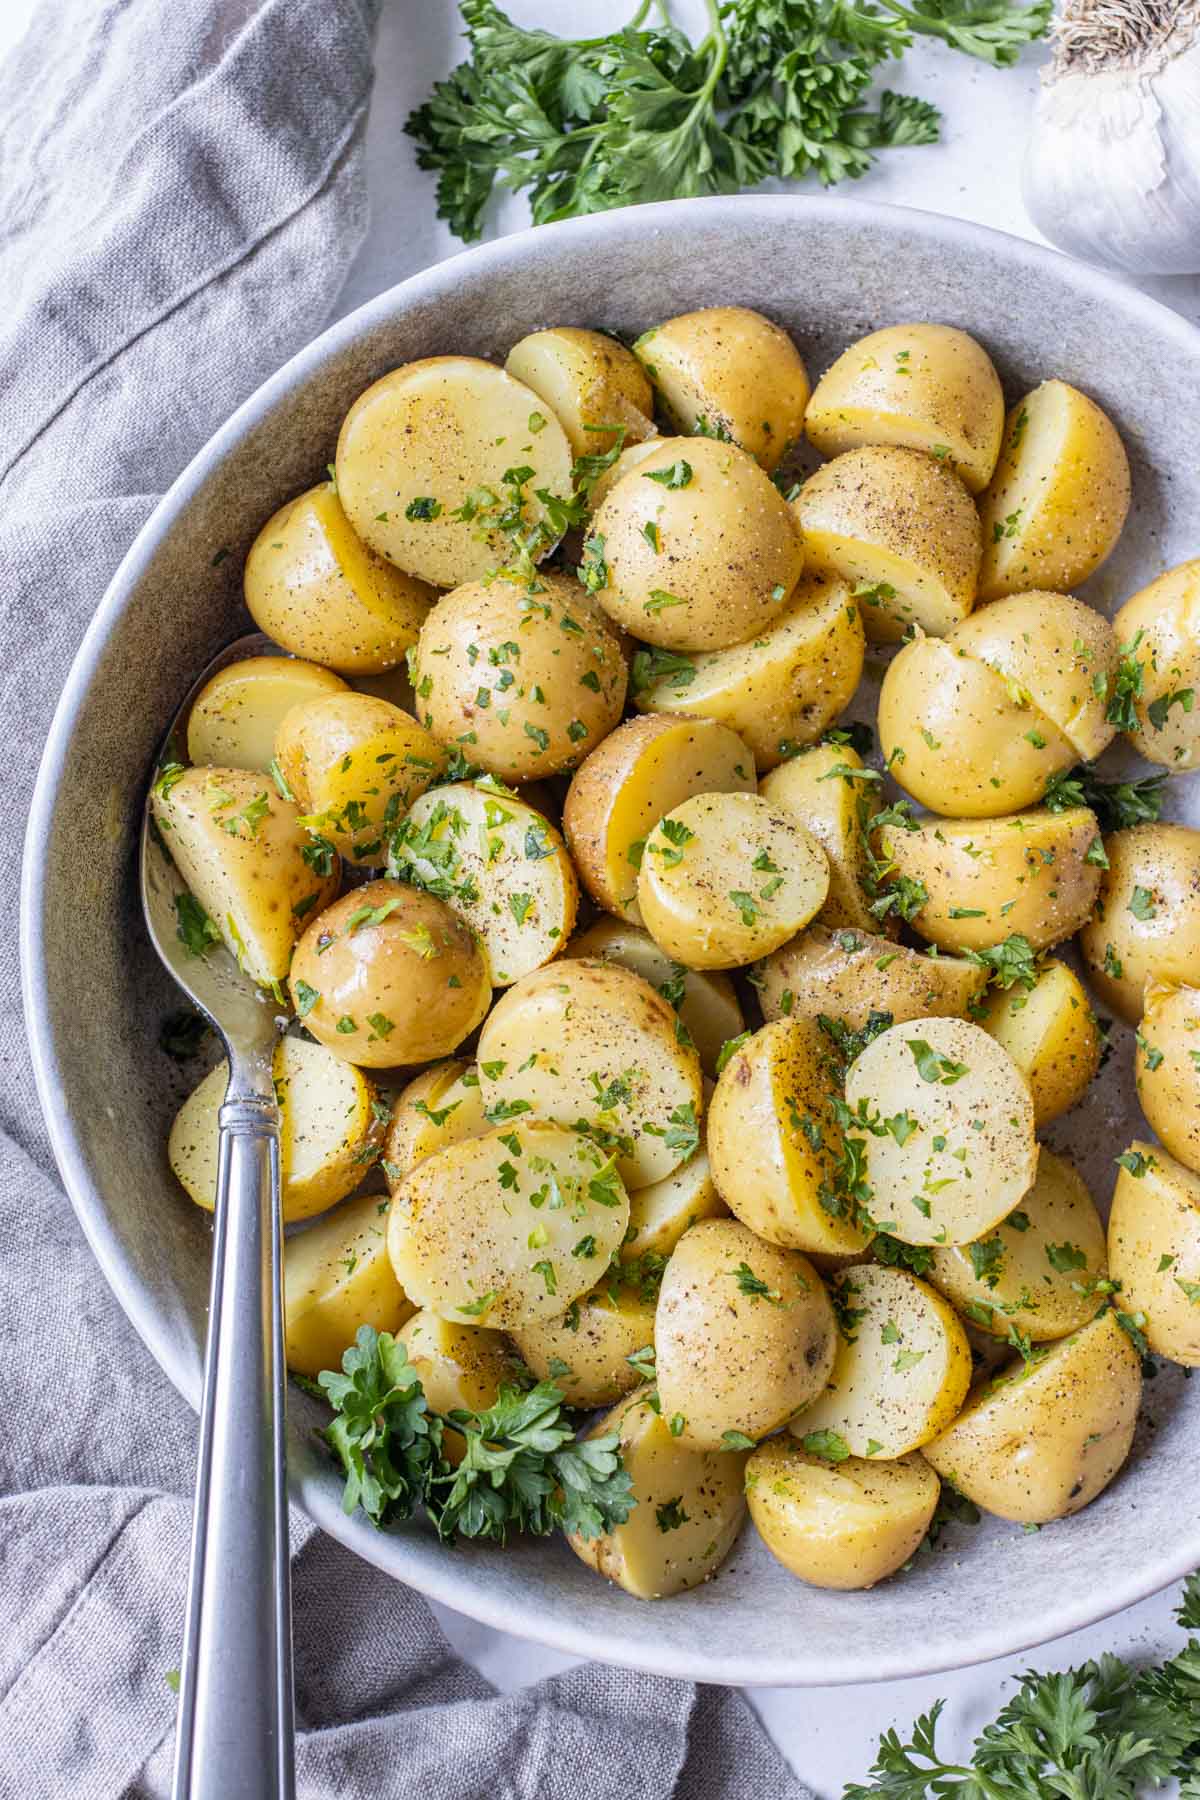 A bowl full of boiled Yukon gold potatoes with parsley.